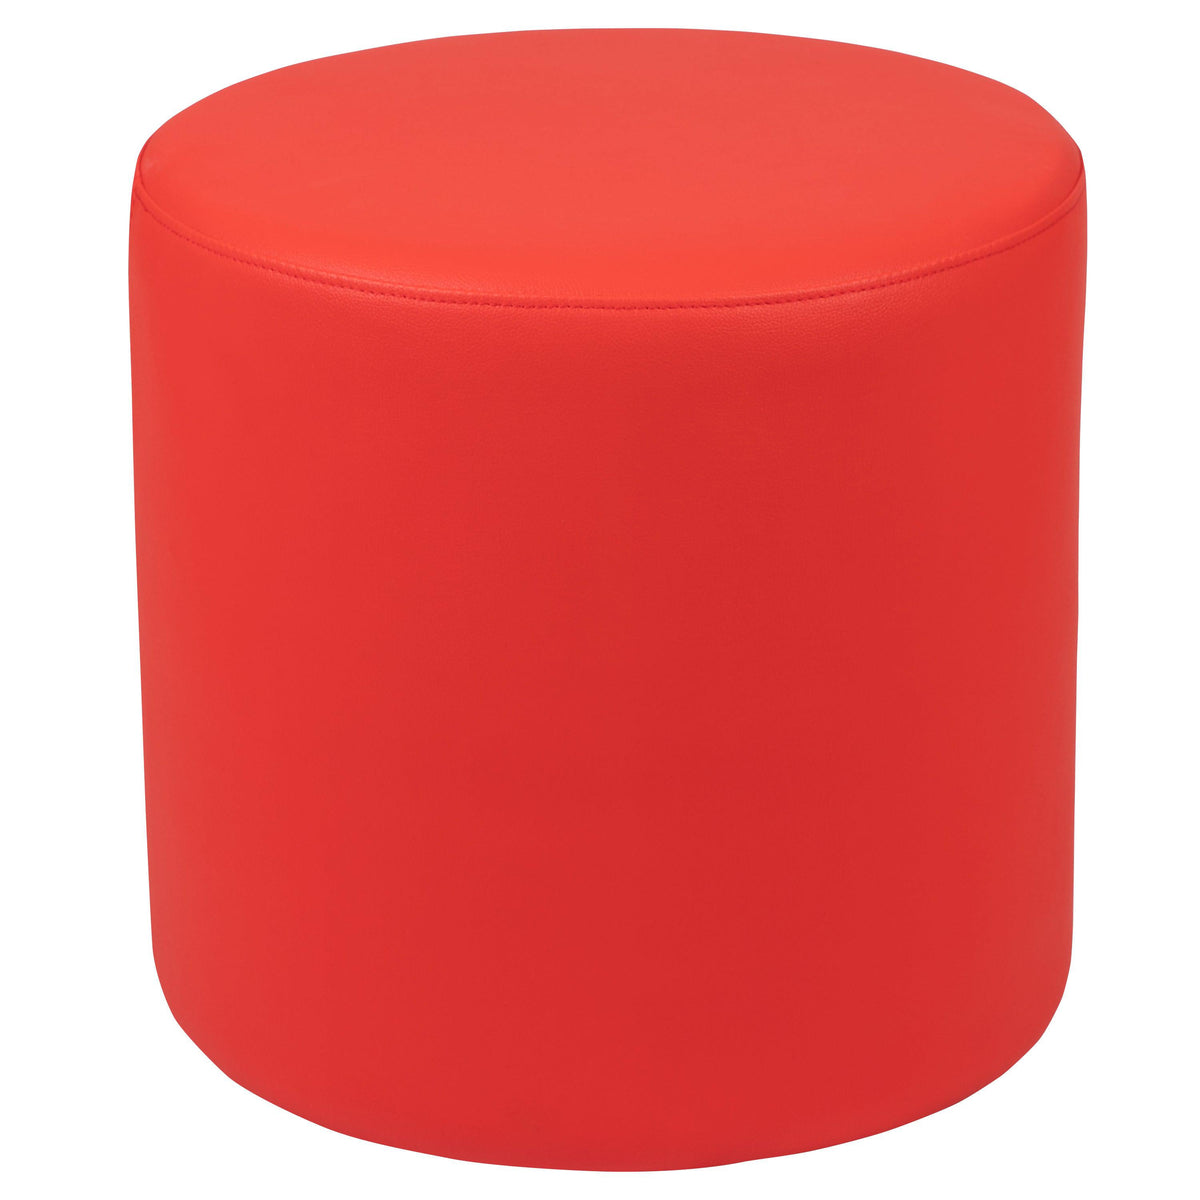 Red |#| 18inchH Soft Seating Flexible Circle for Classrooms and Common Spaces - Red